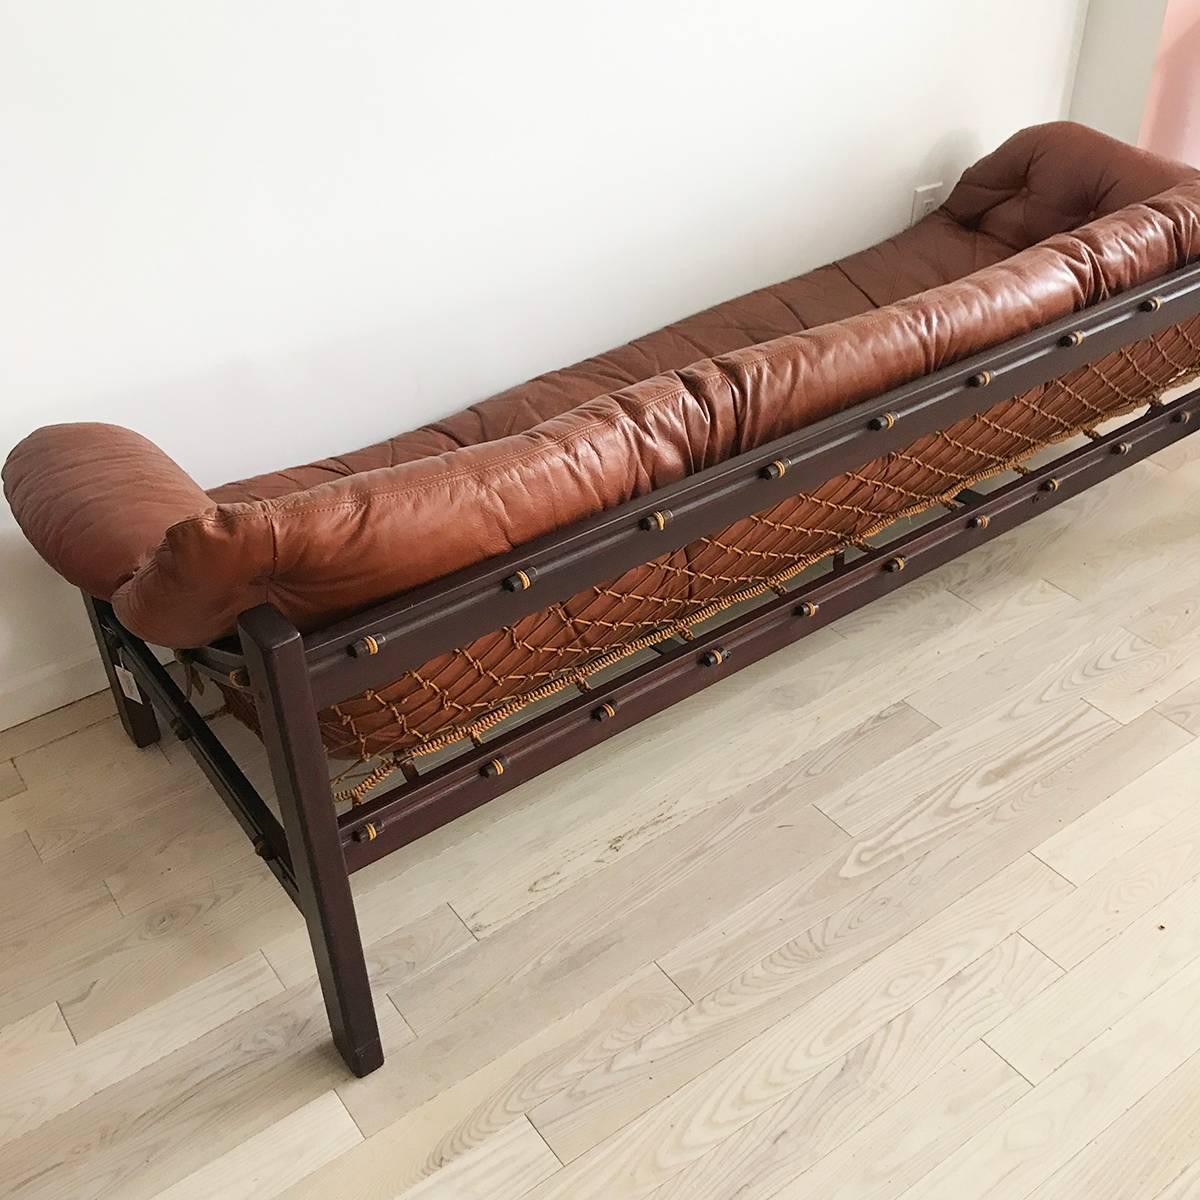 The Amazonas sofa designed by French designer Jean Gillon inspired by and techniques of Brazilian fishermen's boats and nets. Circa 1960s. 
Cognac colored tufted leather upholstery perfectly worn and aged. Rope hammock sling support, against